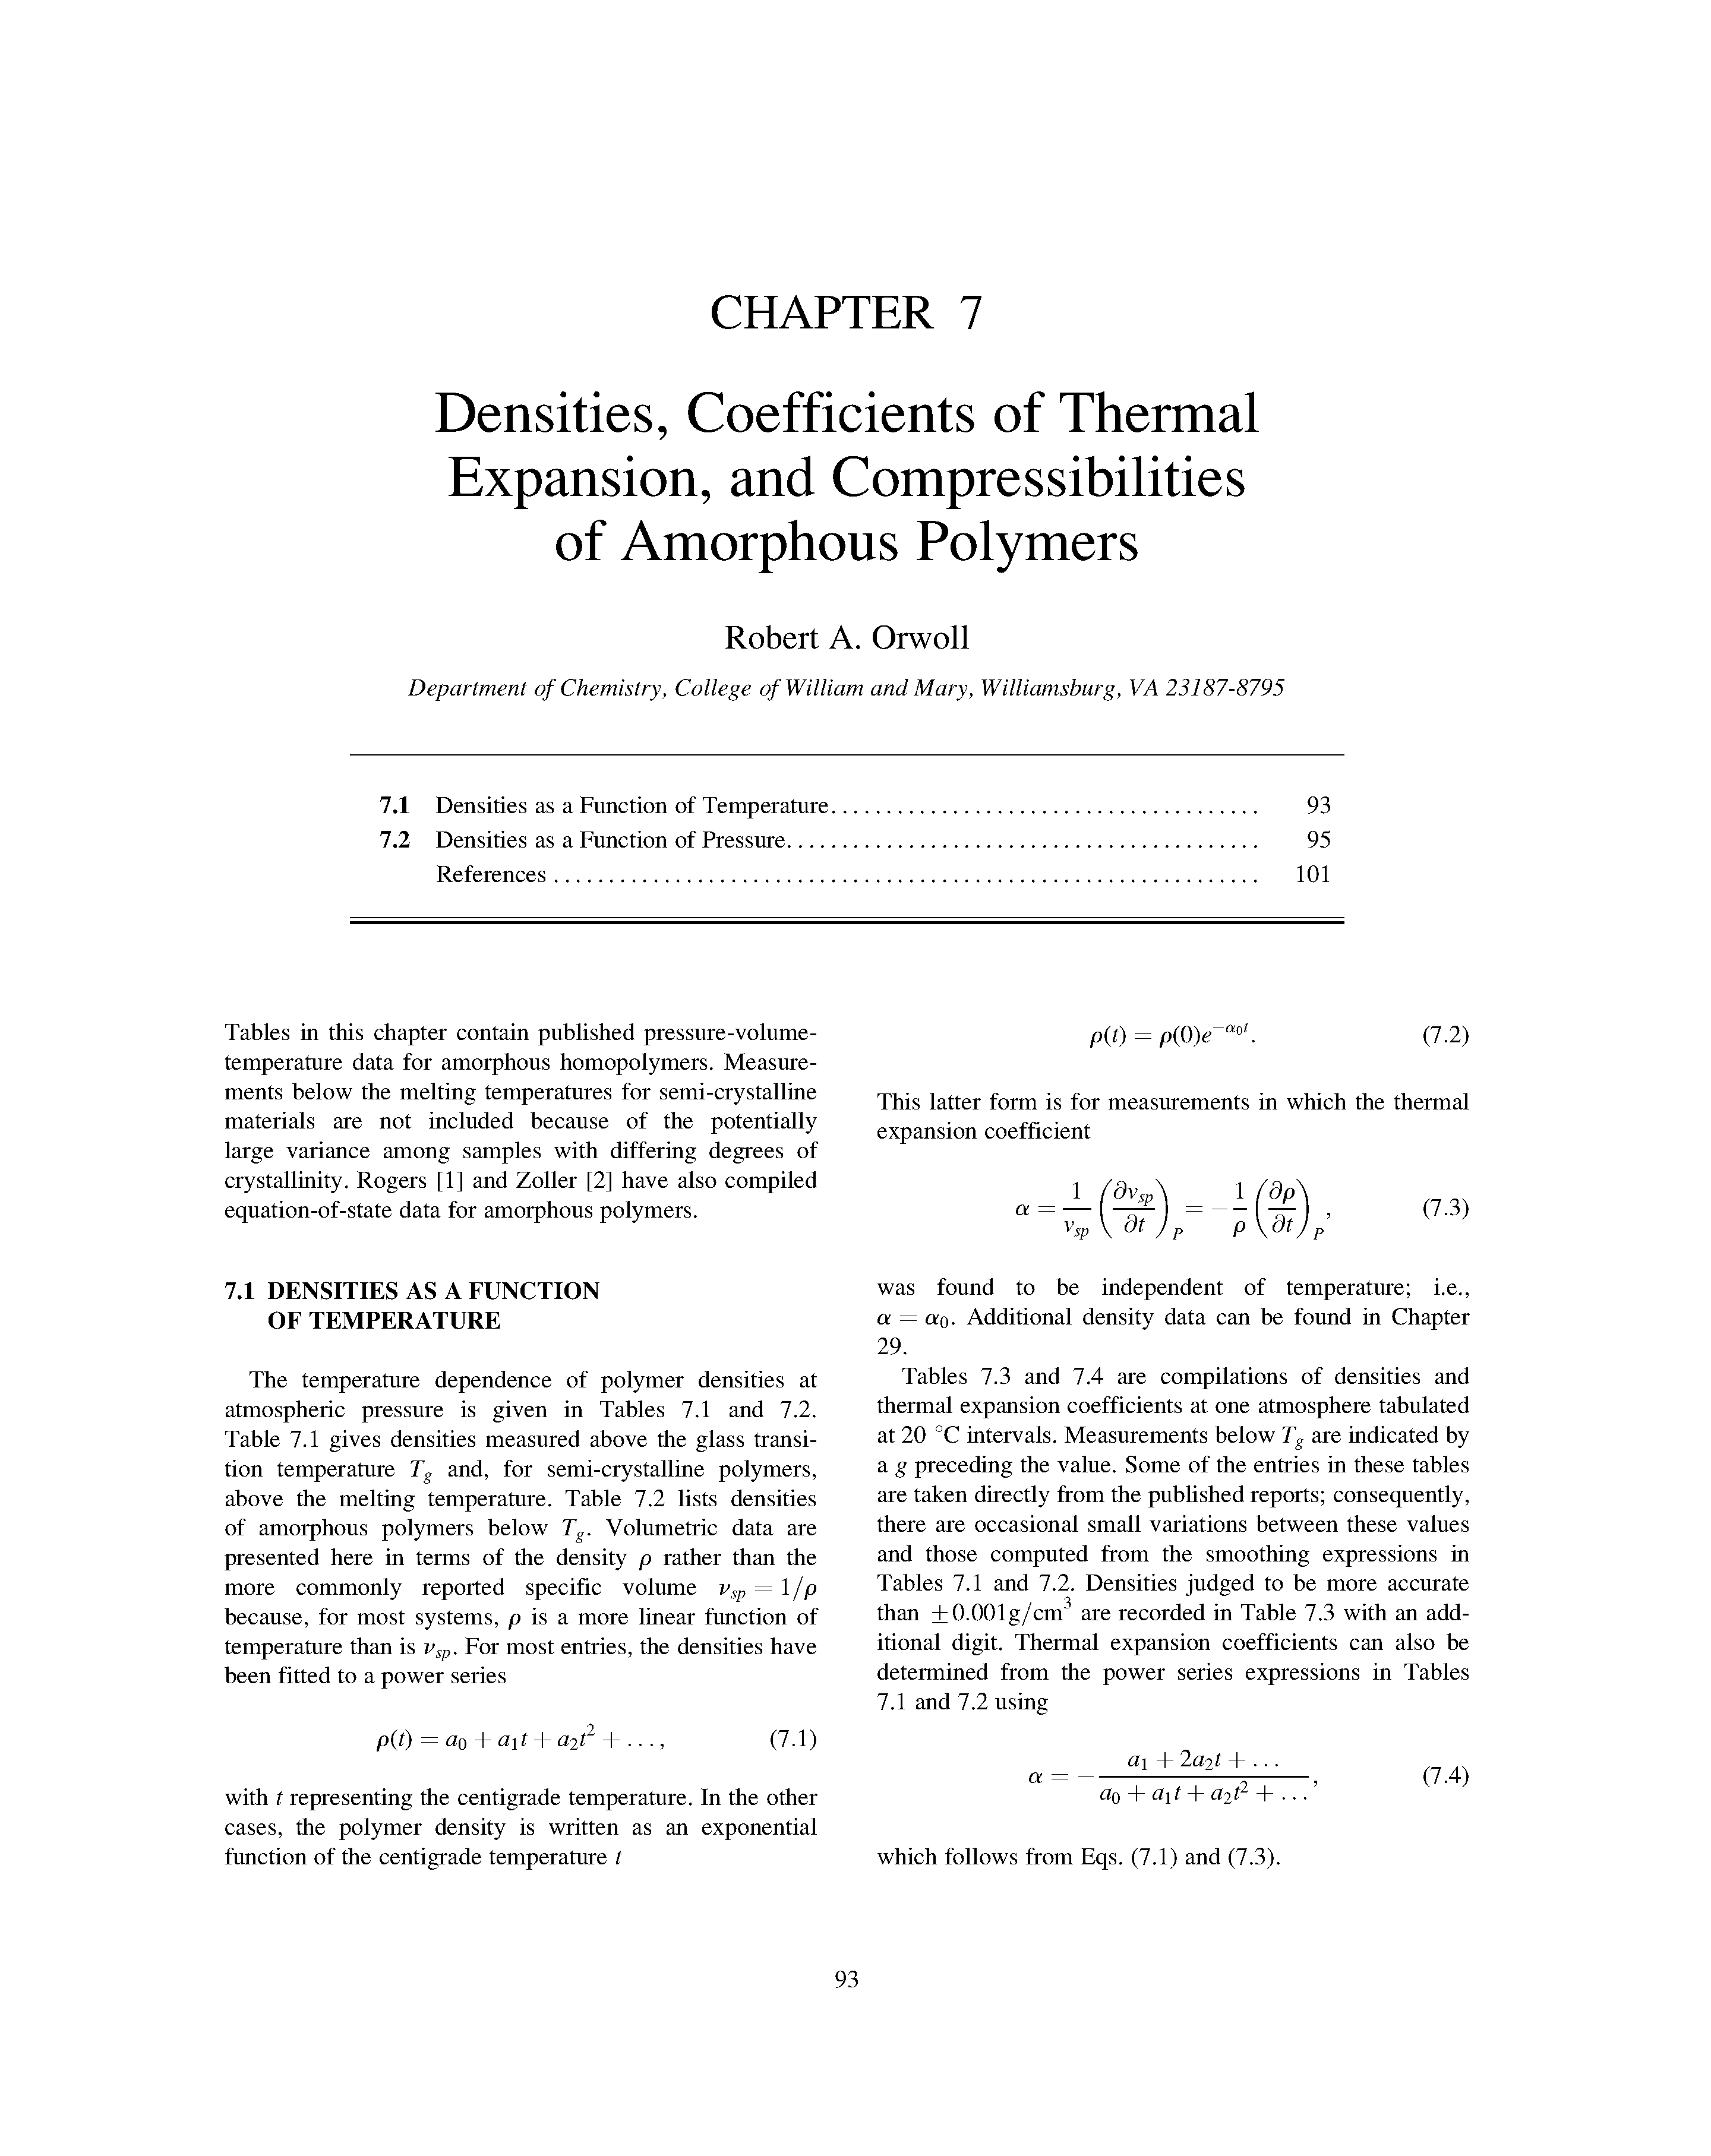 Tables in this chapter contain published pressure-volume-temperature data for amorphous homopolymers. Measurements below the melting temperatures for semi-crystalline materials are not included because of the potentially large variance among samples with differing degrees of crystallinity. Rogers [1] and Zoller [2] have also compiled equation-of-state data for amorphous polymers.